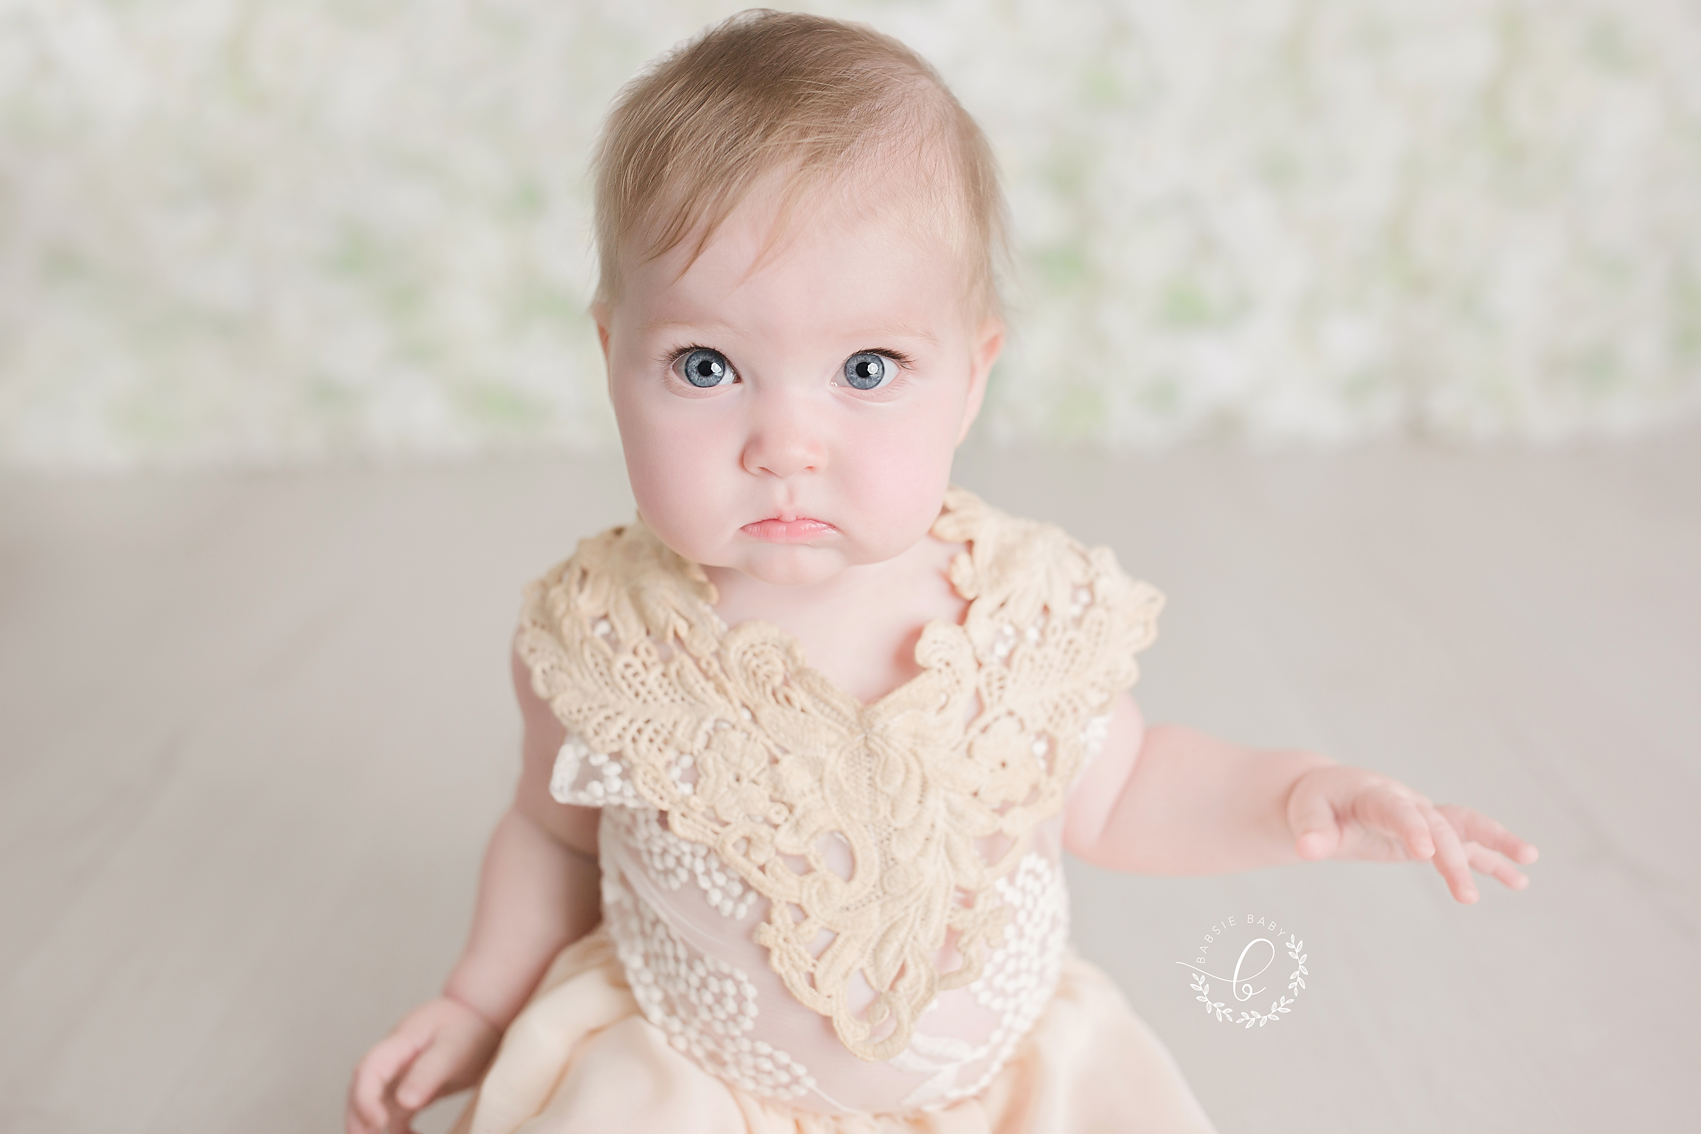 San-Diego-Baby-Photographer-6-Month-Old-Based-in-Oceanside-California.png